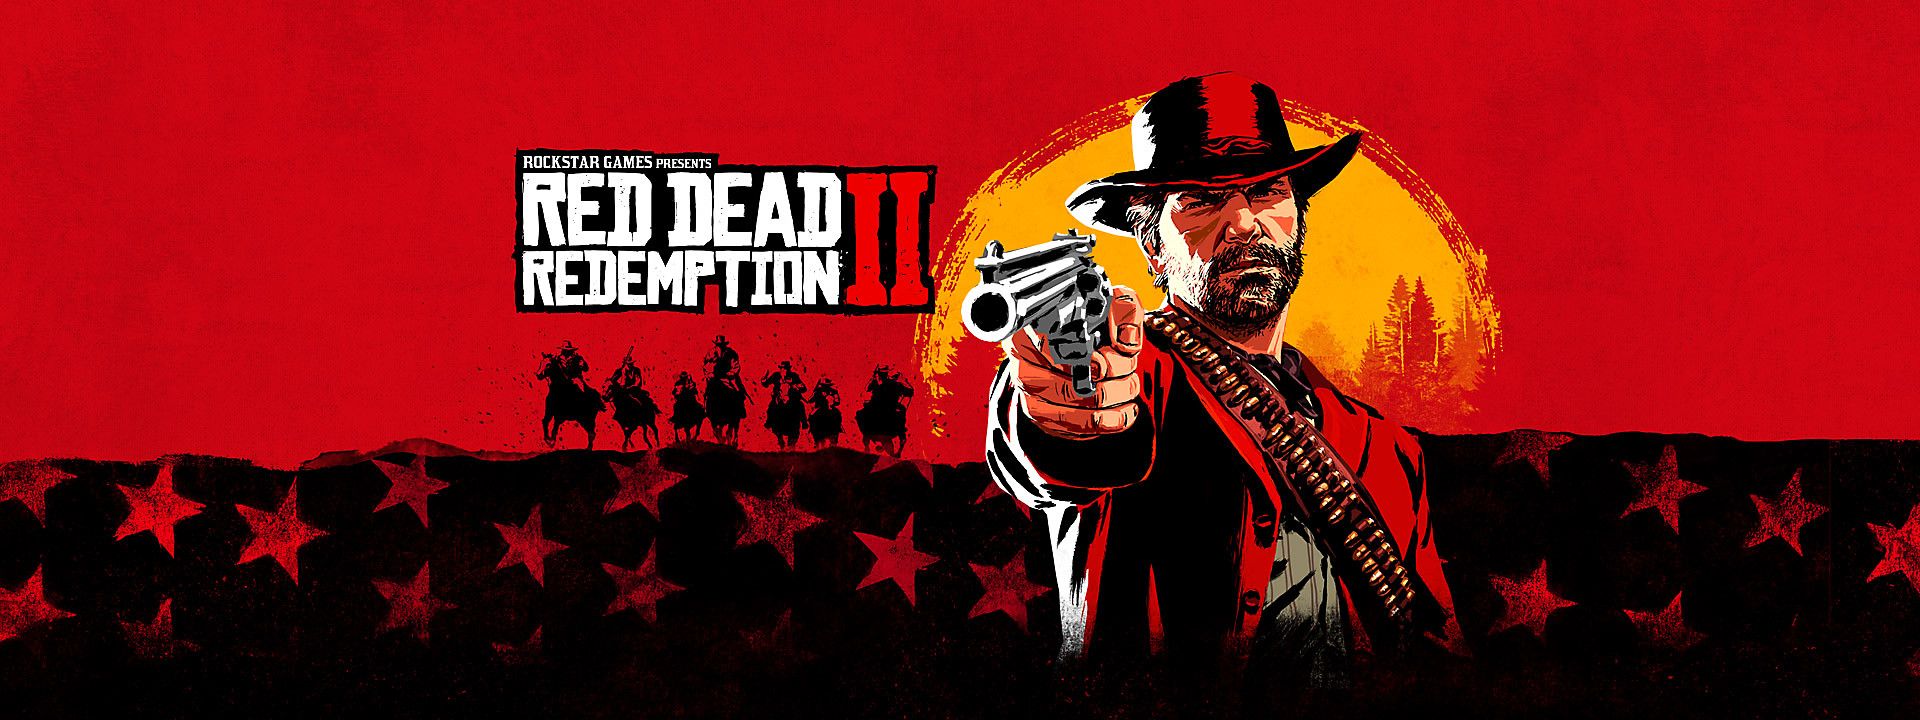 Red Dead Redemption img